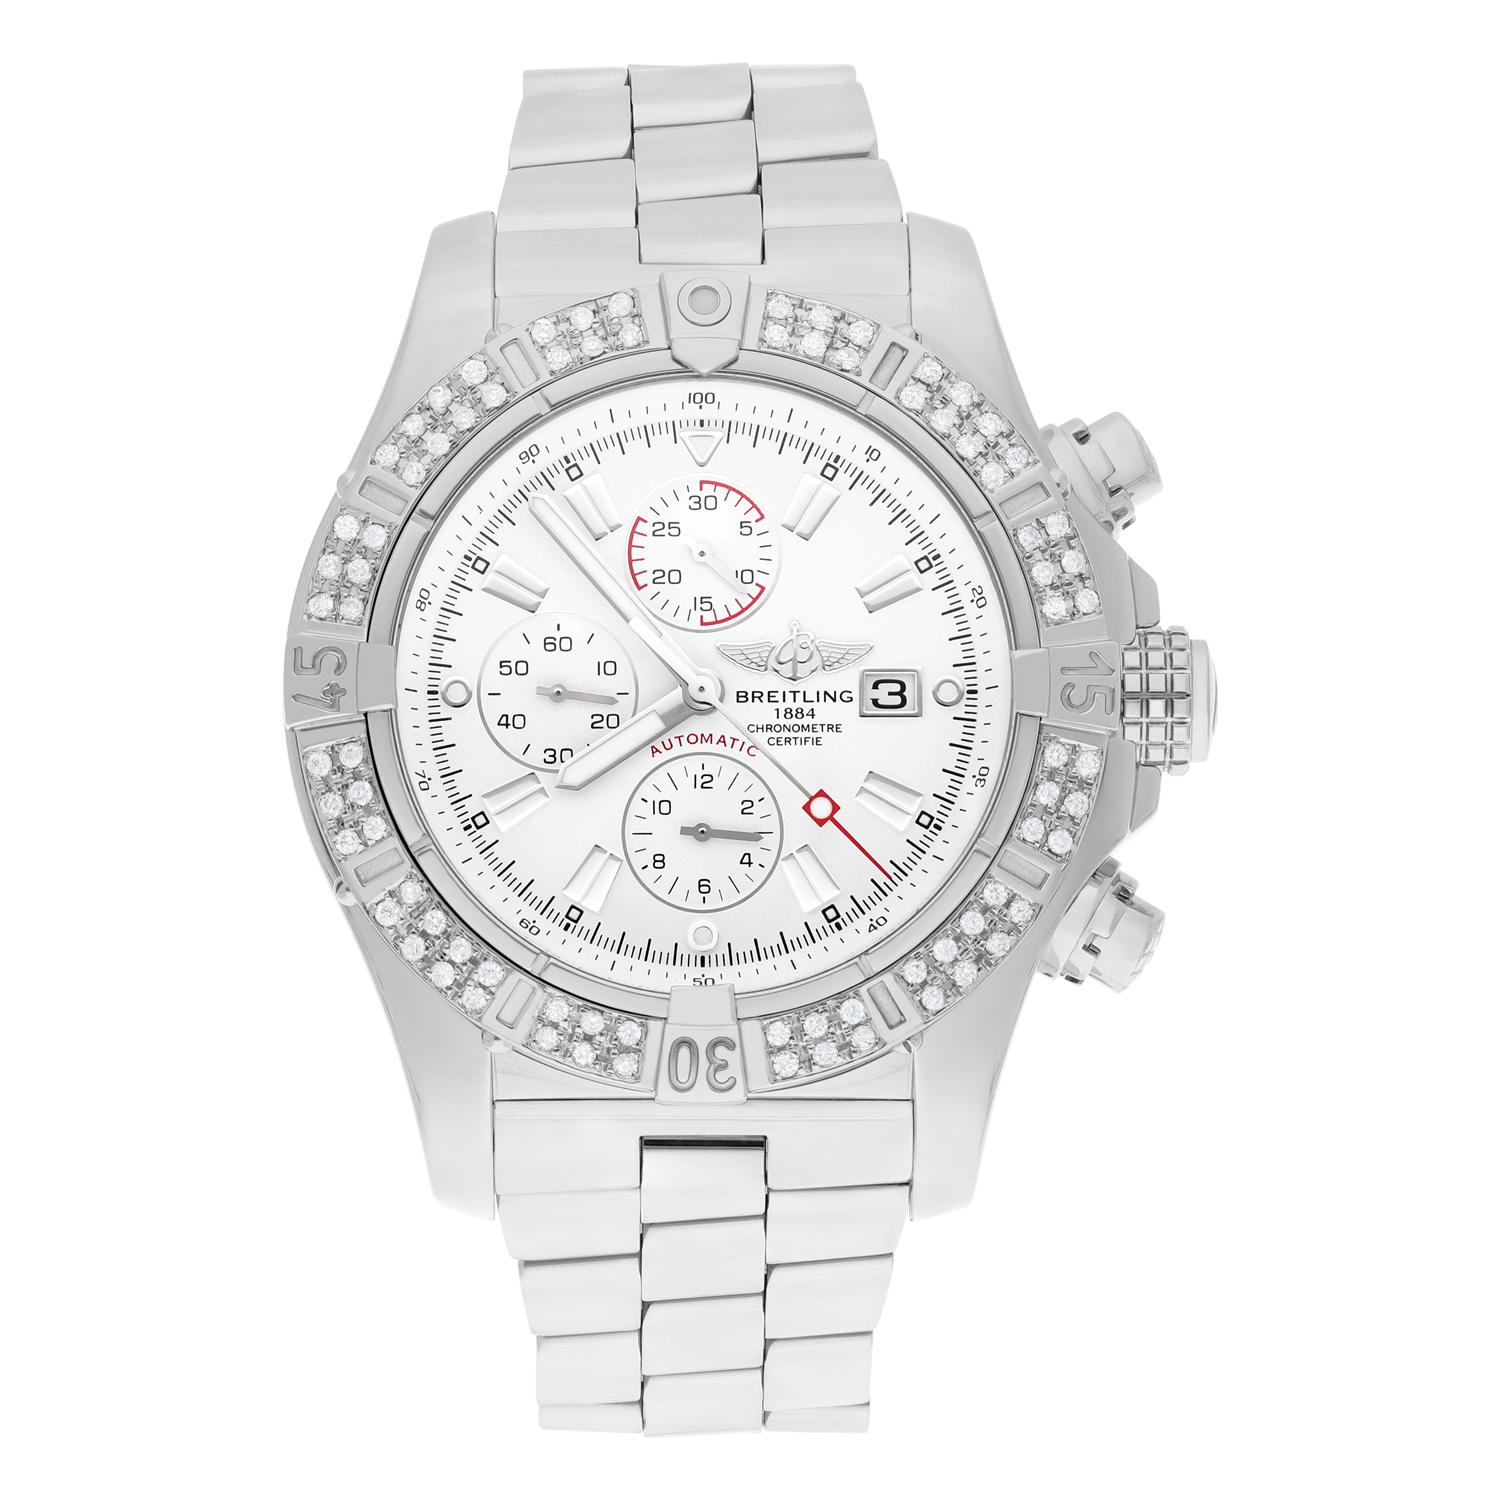 Brand: Breitling Series: Super Avenger Model: A13370 Case Diameter: 48 mm Bracelet: Stainless steel Bezel: Custom diamond set Dial: White dial The sale includes a jewelry watch box and an appraisal certificate which states the watch's credentials